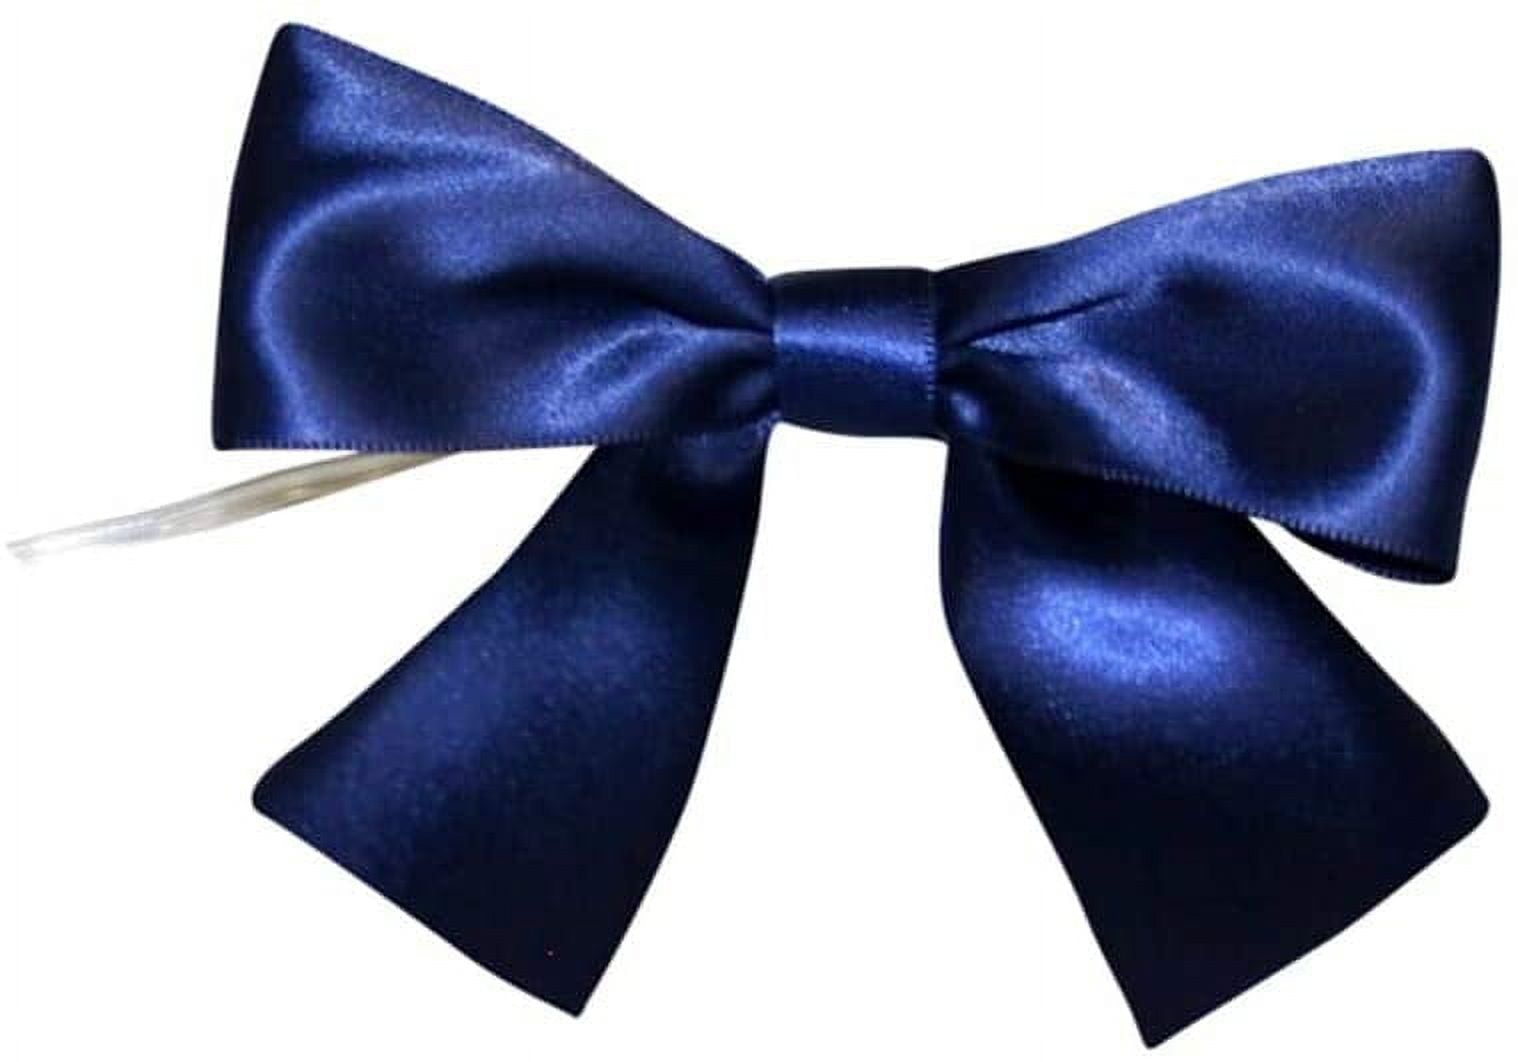 Dark Blue Bow Ribbon Band Satin Navy Stripe Fabric For Christmas Holiday  Gift Box Greeting Card Banner Present Wrap Design Decoration Ornament Stock  Photo - Download Image Now - iStock